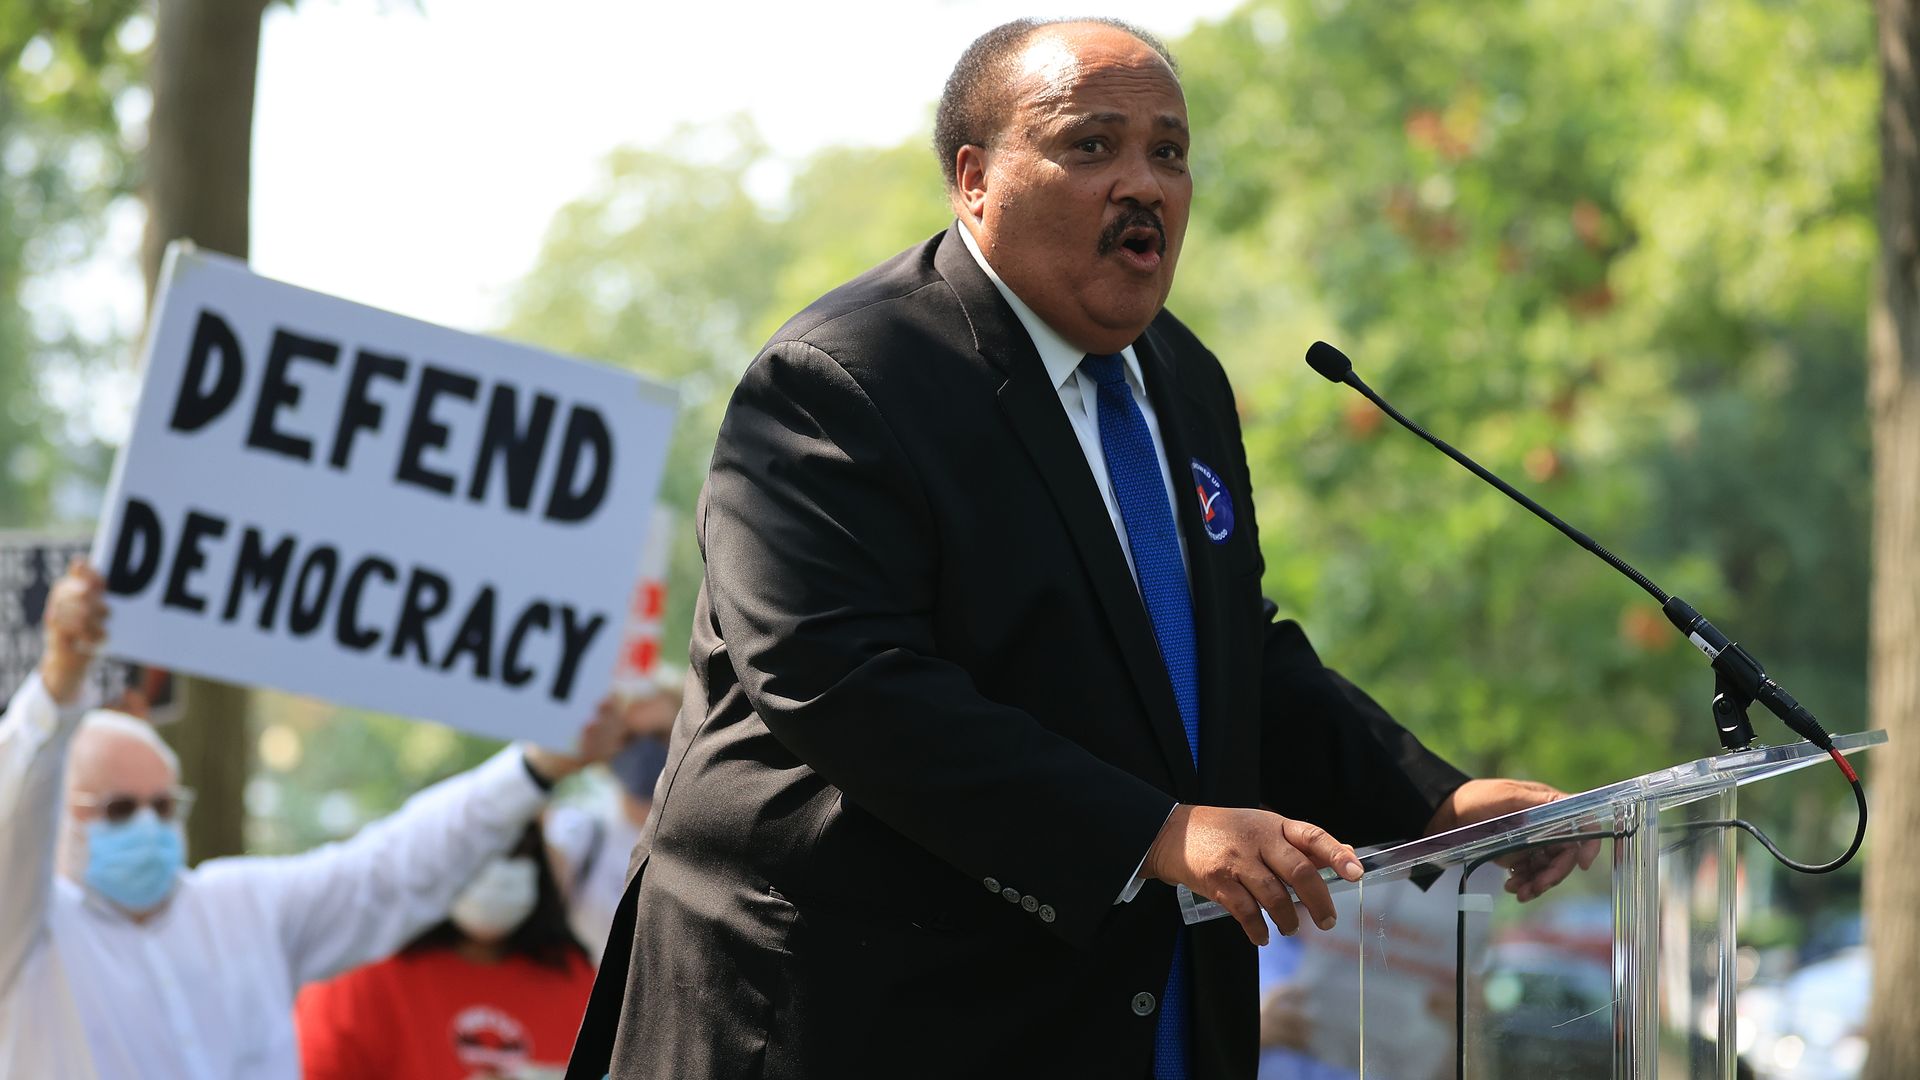 Martin Luther King III is seen speaking at a rally.